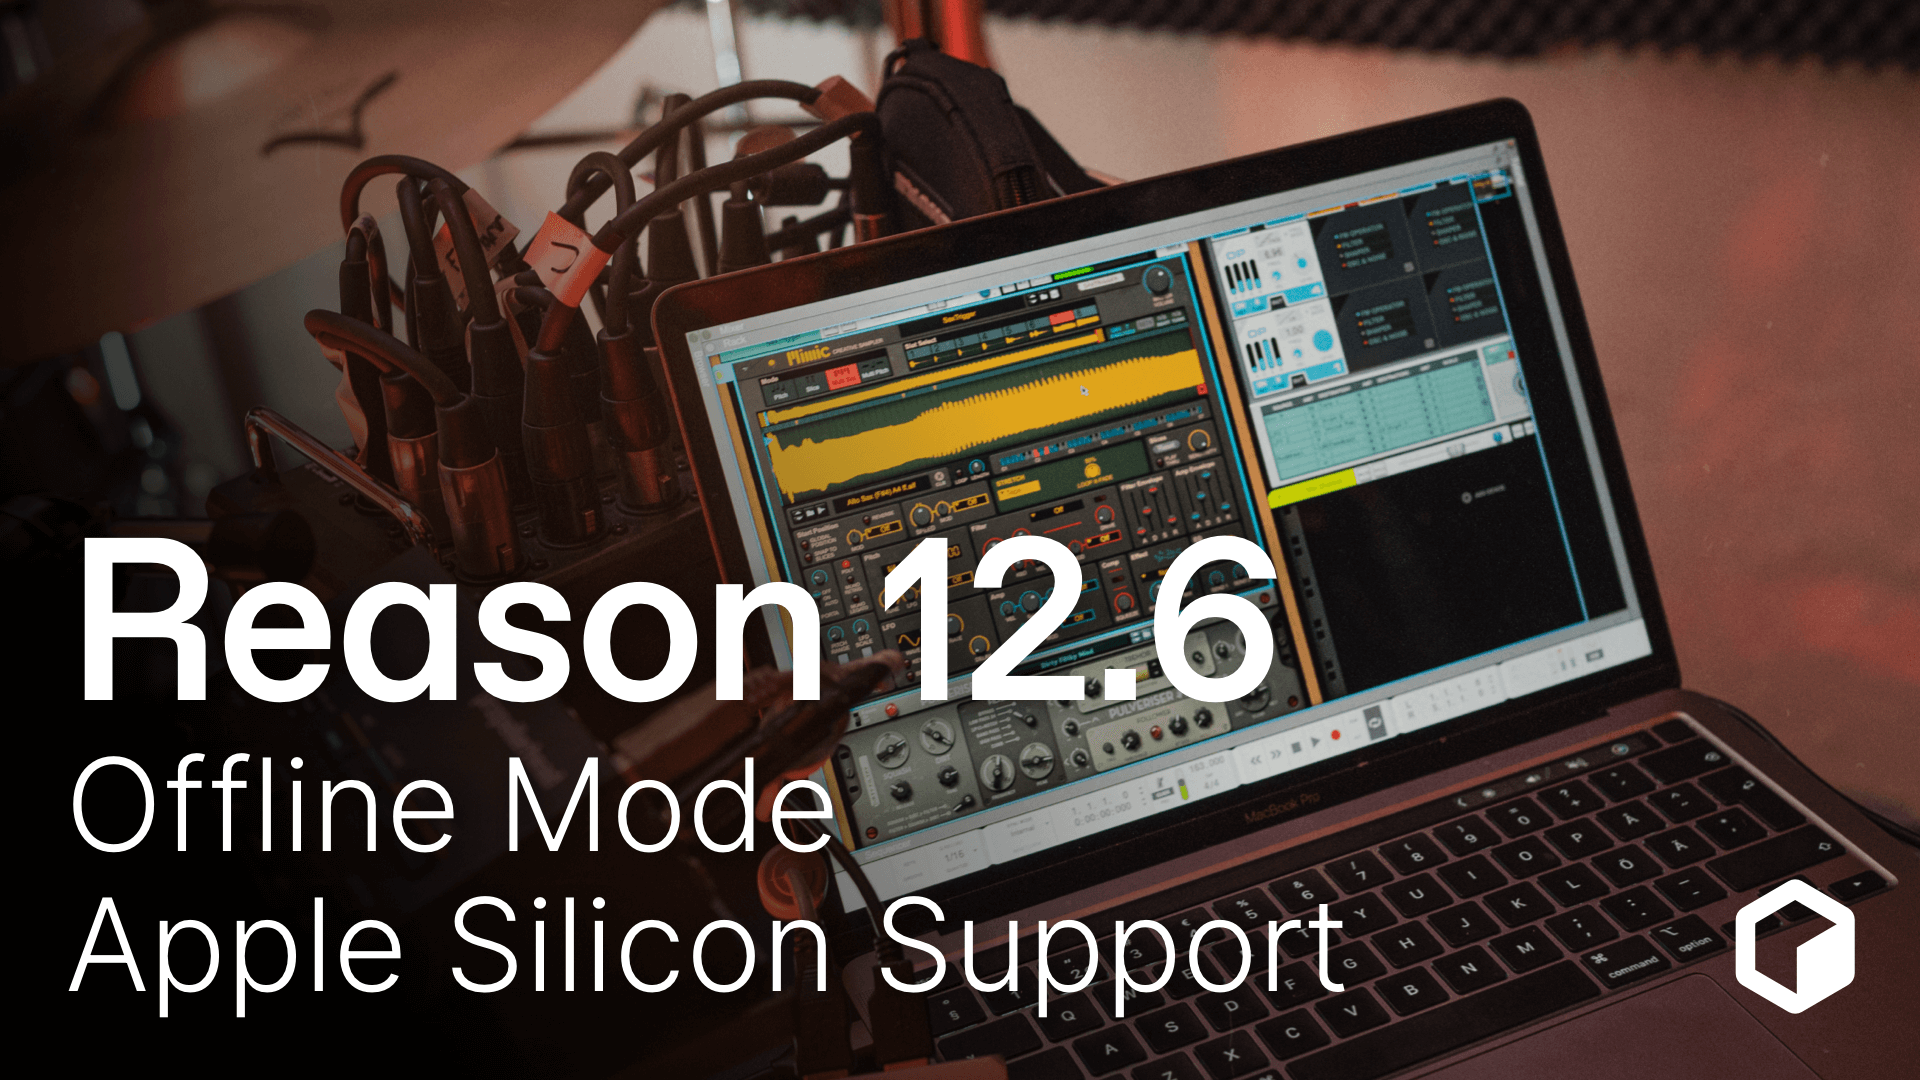 Cover Image for Reason Studios introduce Native Support for Apple Silicon and offline mode with  the new 12.6 Update